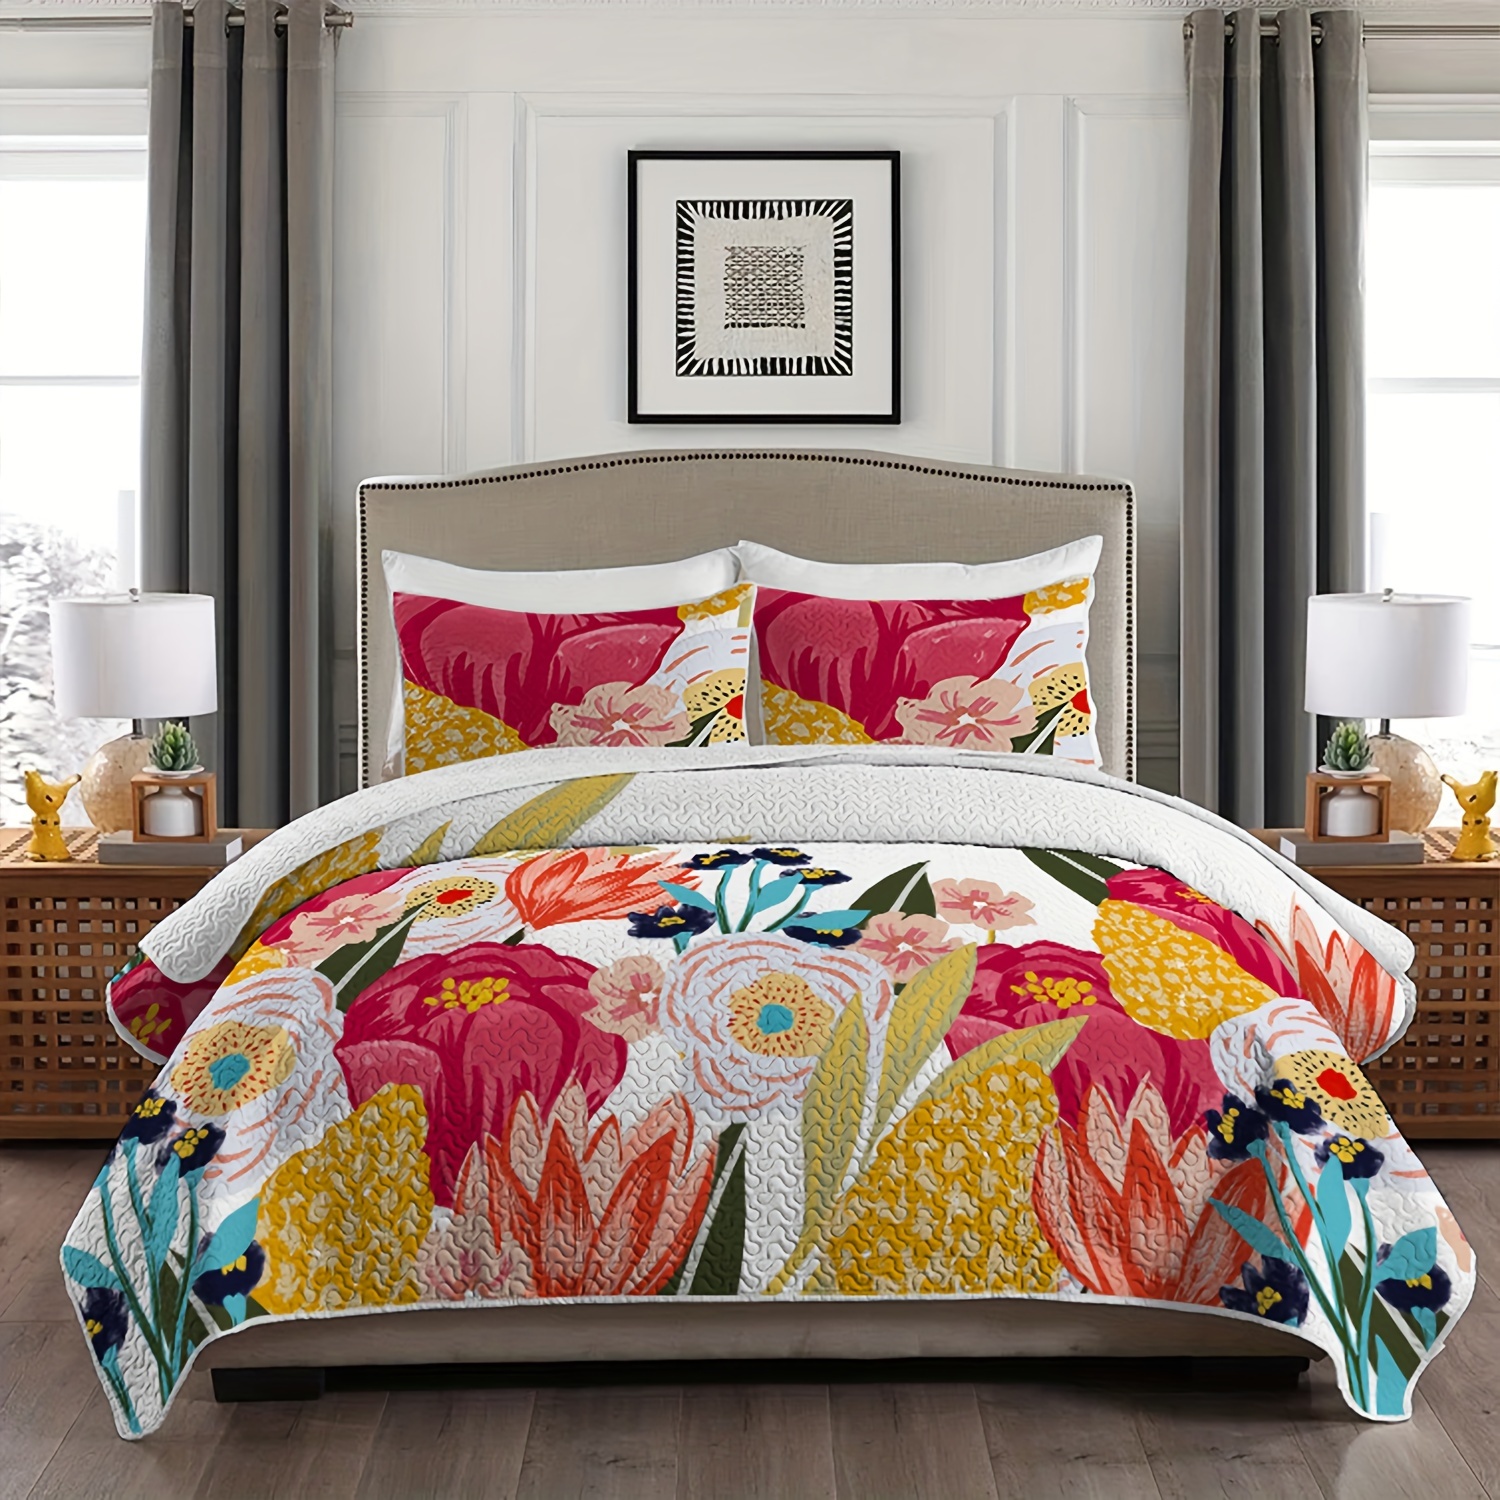 

3pcs Colorful Floral Print Bedspread Set (1 Bedspread + 2 Pillowcases, No Filling), Heart-warming Colorful Floral Print Bedspread Set, Soft Lightweight Coverlet For All Seasons